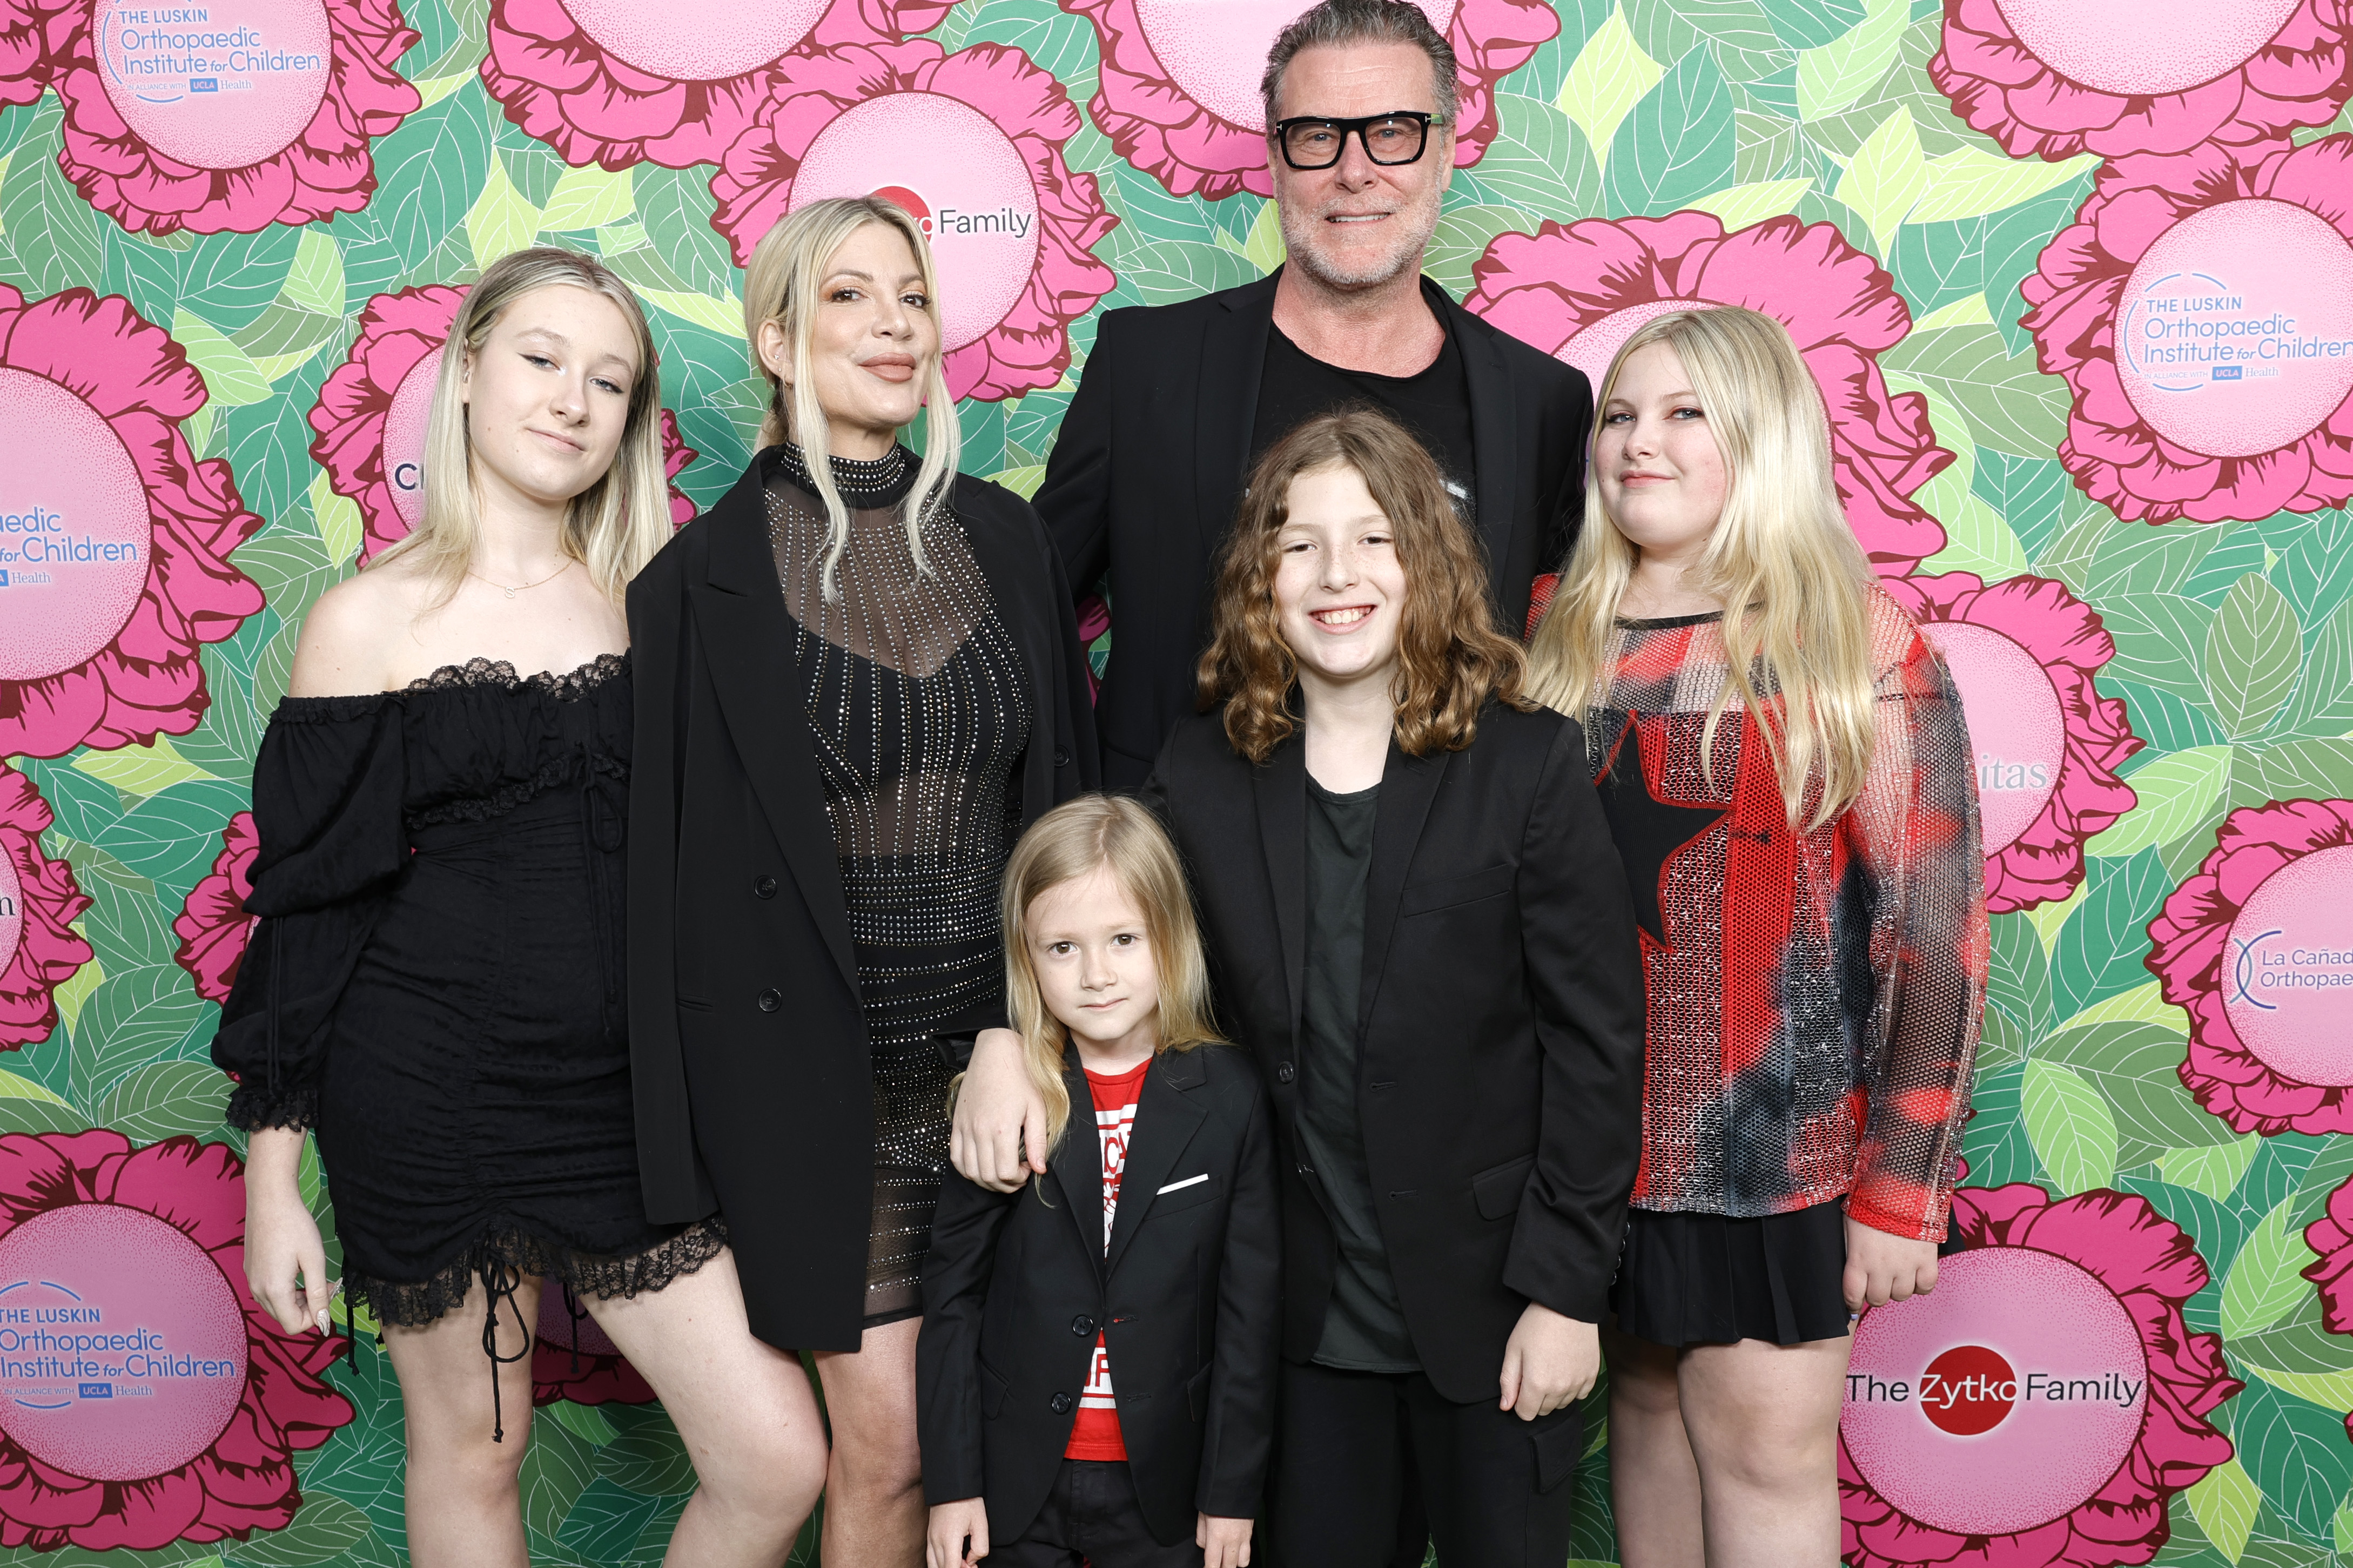 (L-R) Stella Spelling, Tori Spelling, Beau Spelling, Dean McDermott, Finn Spelling, and Hattie Spelling at the Luskin Orthopaedic Institute for Children, Stand for Kids Gala at Universal Studios Hollywood on June 10, 2023 in Universal City, California | Source: Getty Images